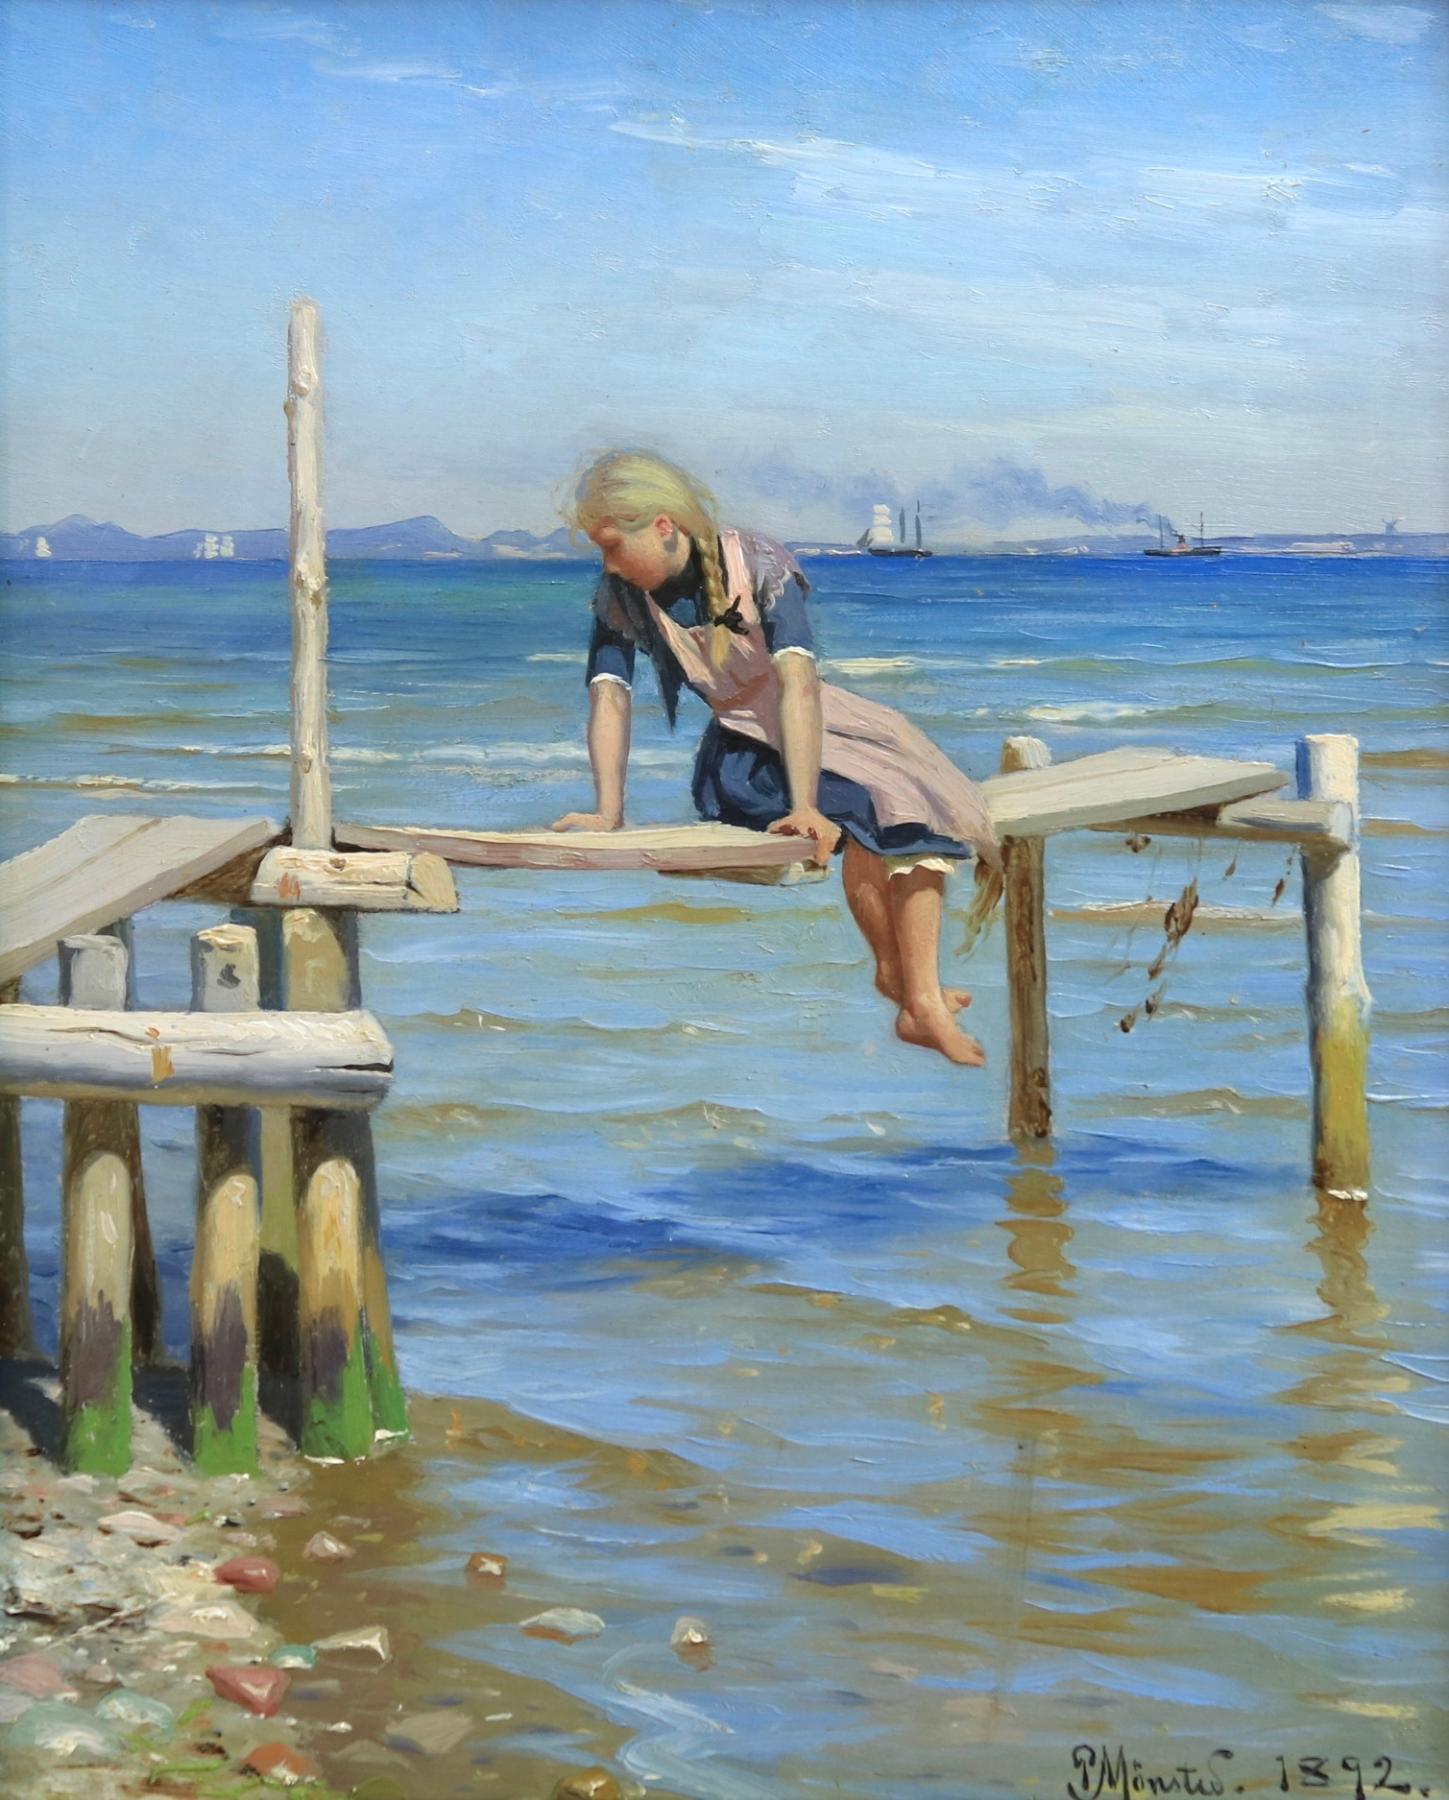 Peder Mørk Mønsted Figurative Painting - Girl on a Jetty - The Oresund at Hellebæk - Realist Oil, Seascape by PM Mønsted